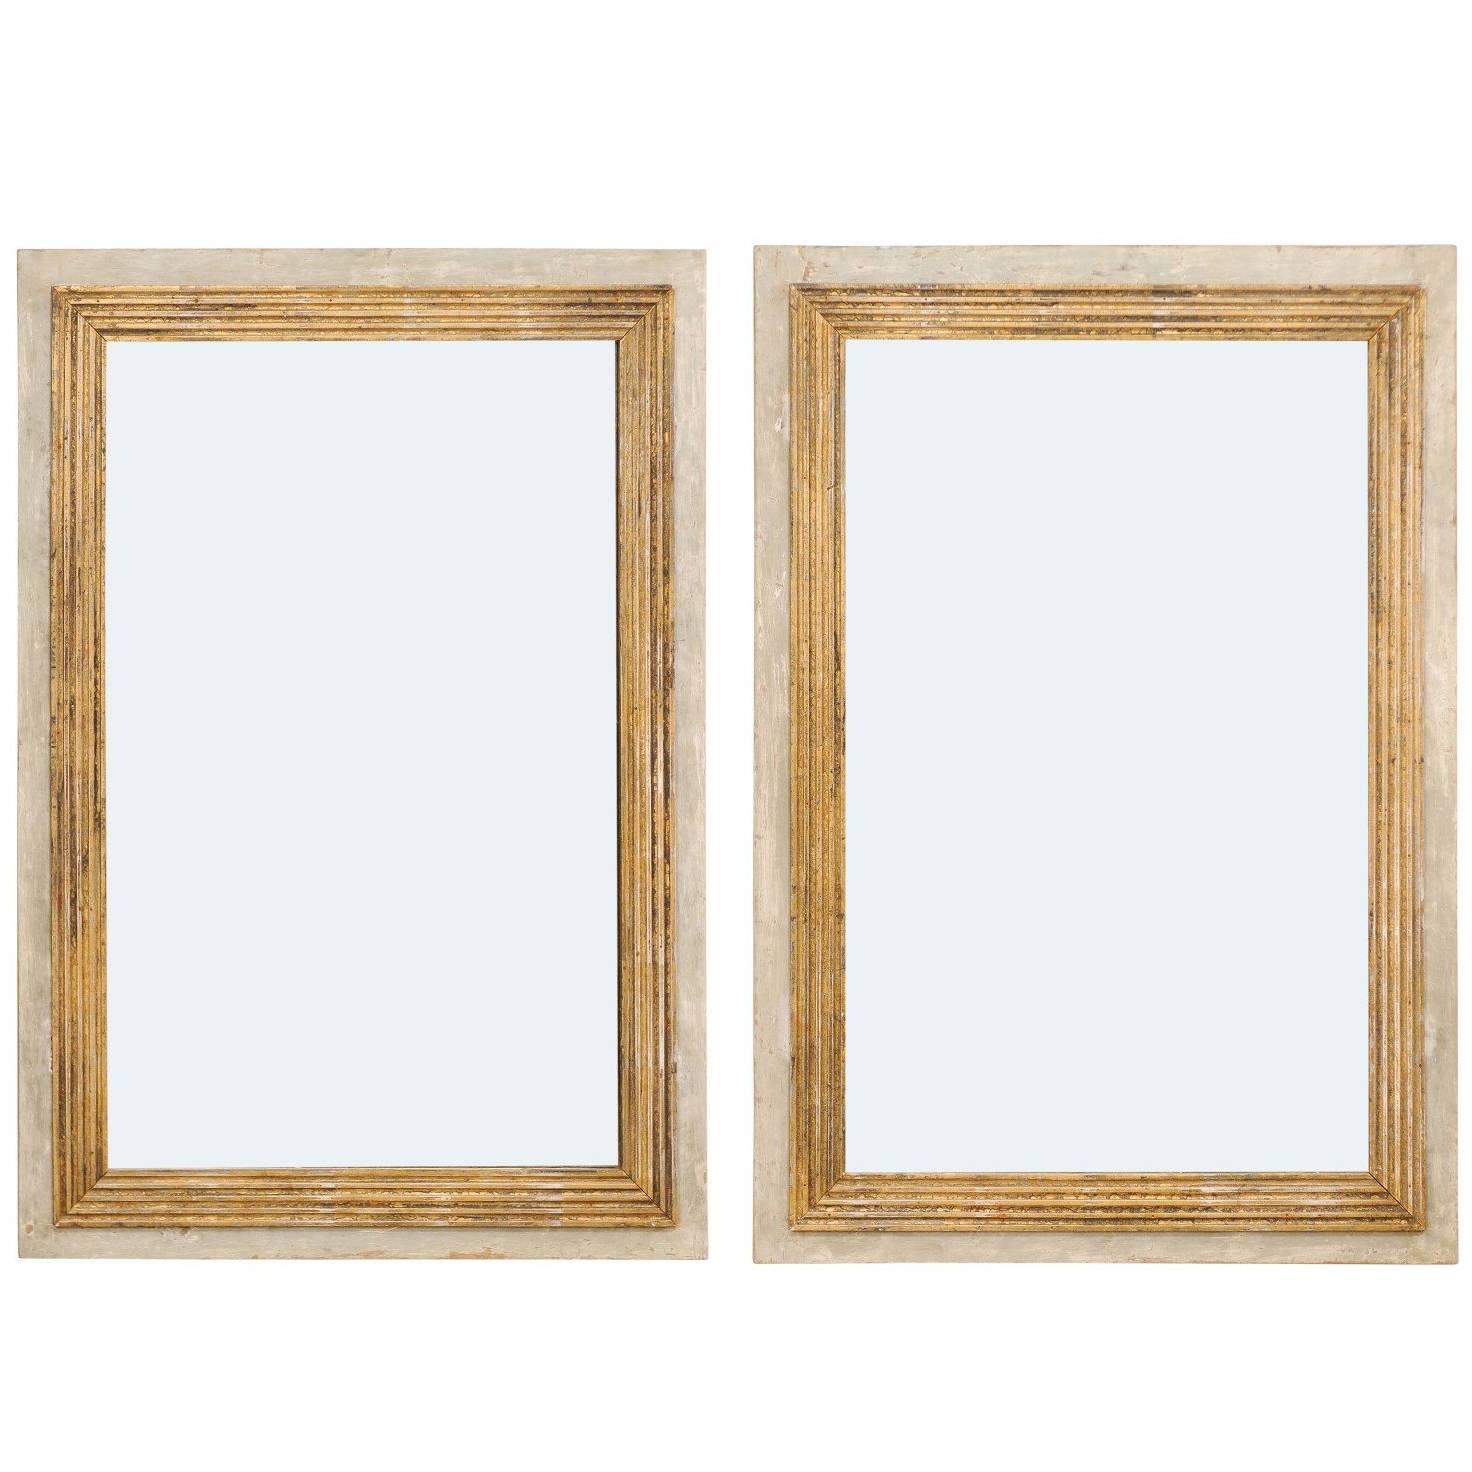 Pair of French Painted Gold and Soft Grey Mirrors with Reeded Details